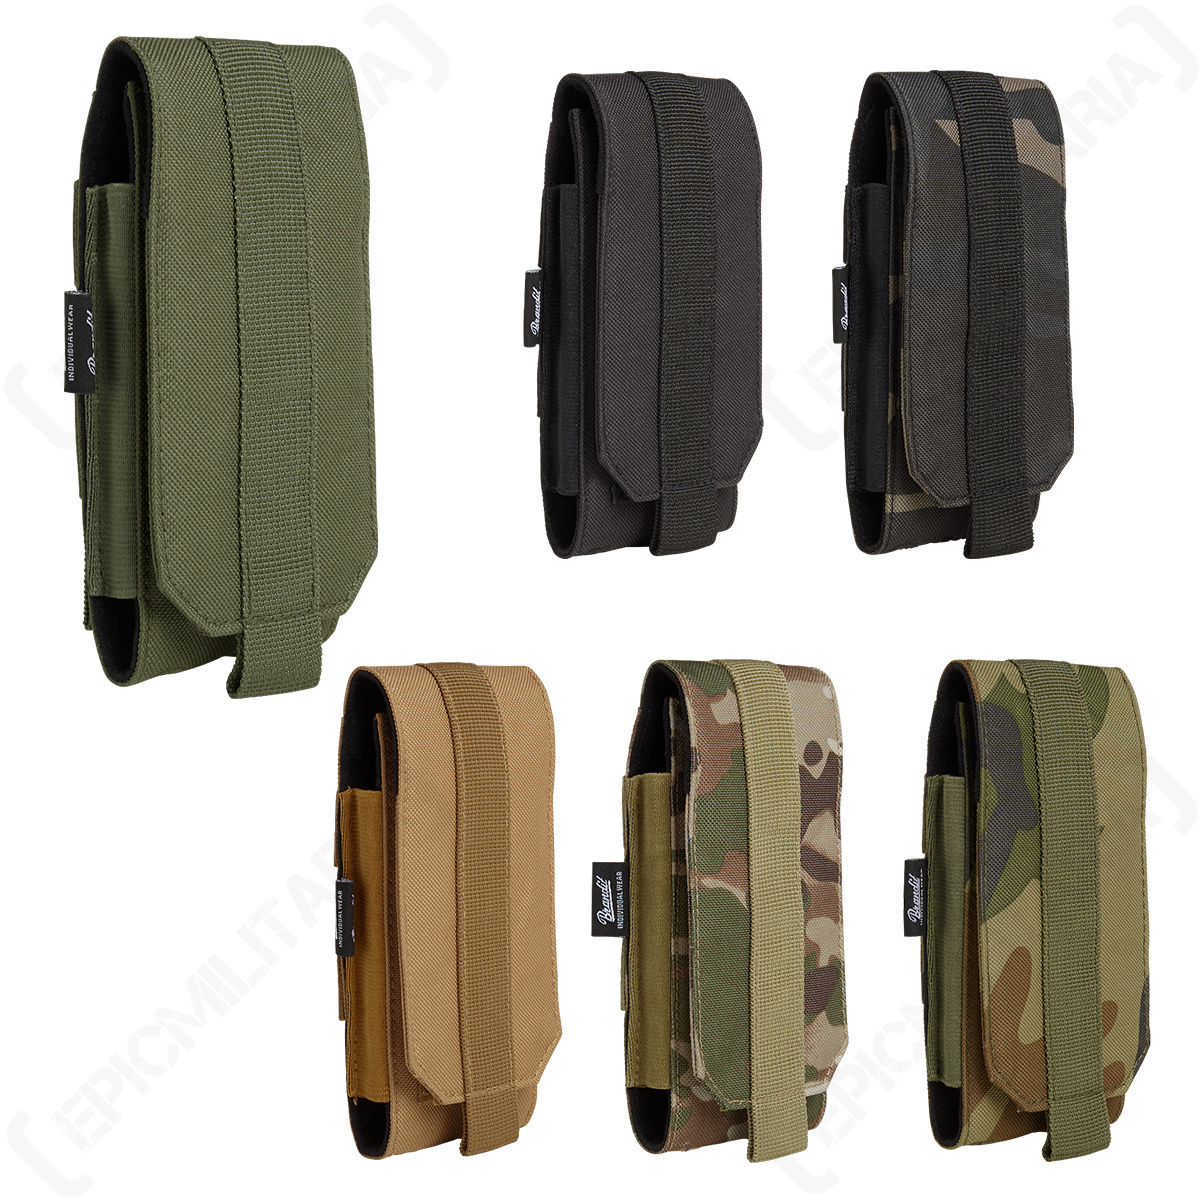 Cell Phone Molle Pocket| iPhone Molle Pouch Holster| Law Enforcement & Security Tactical Molle Phone Pouch - Made in The USA by Bluestone Safety